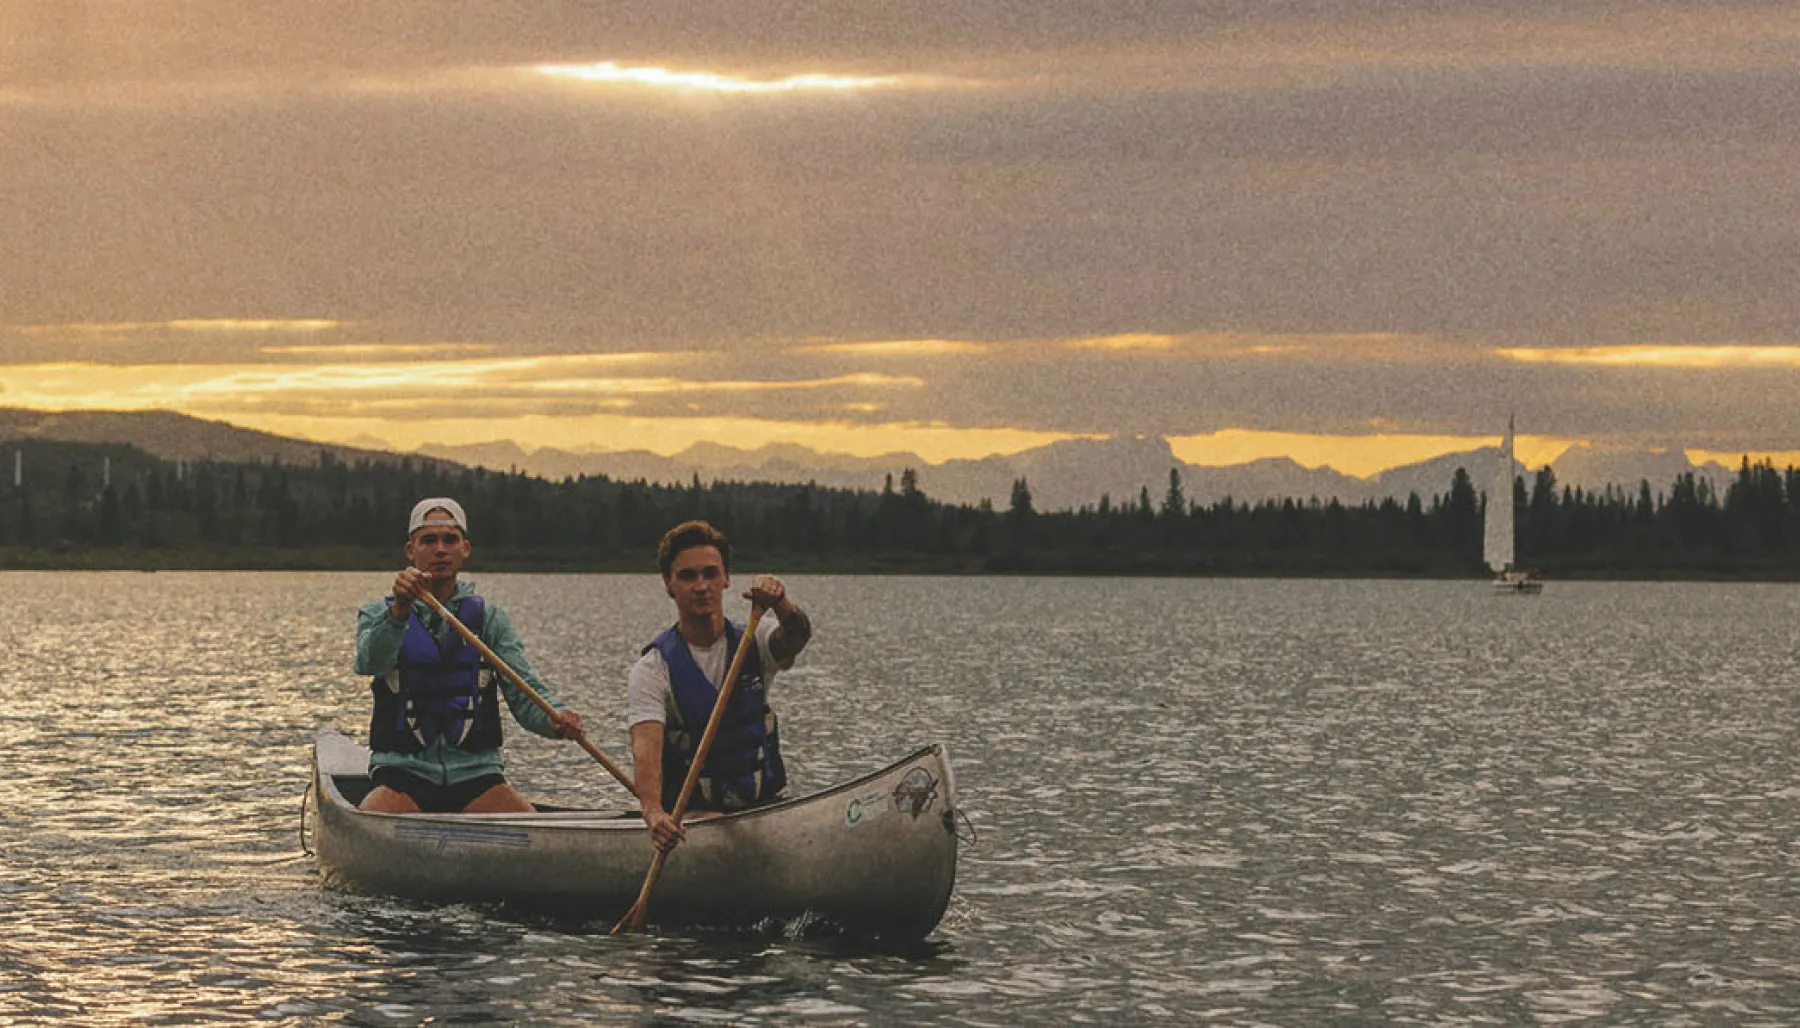 two people canoeing on Glenmore reservoir during sunset. the mountains can be seen along the horizon in the background.